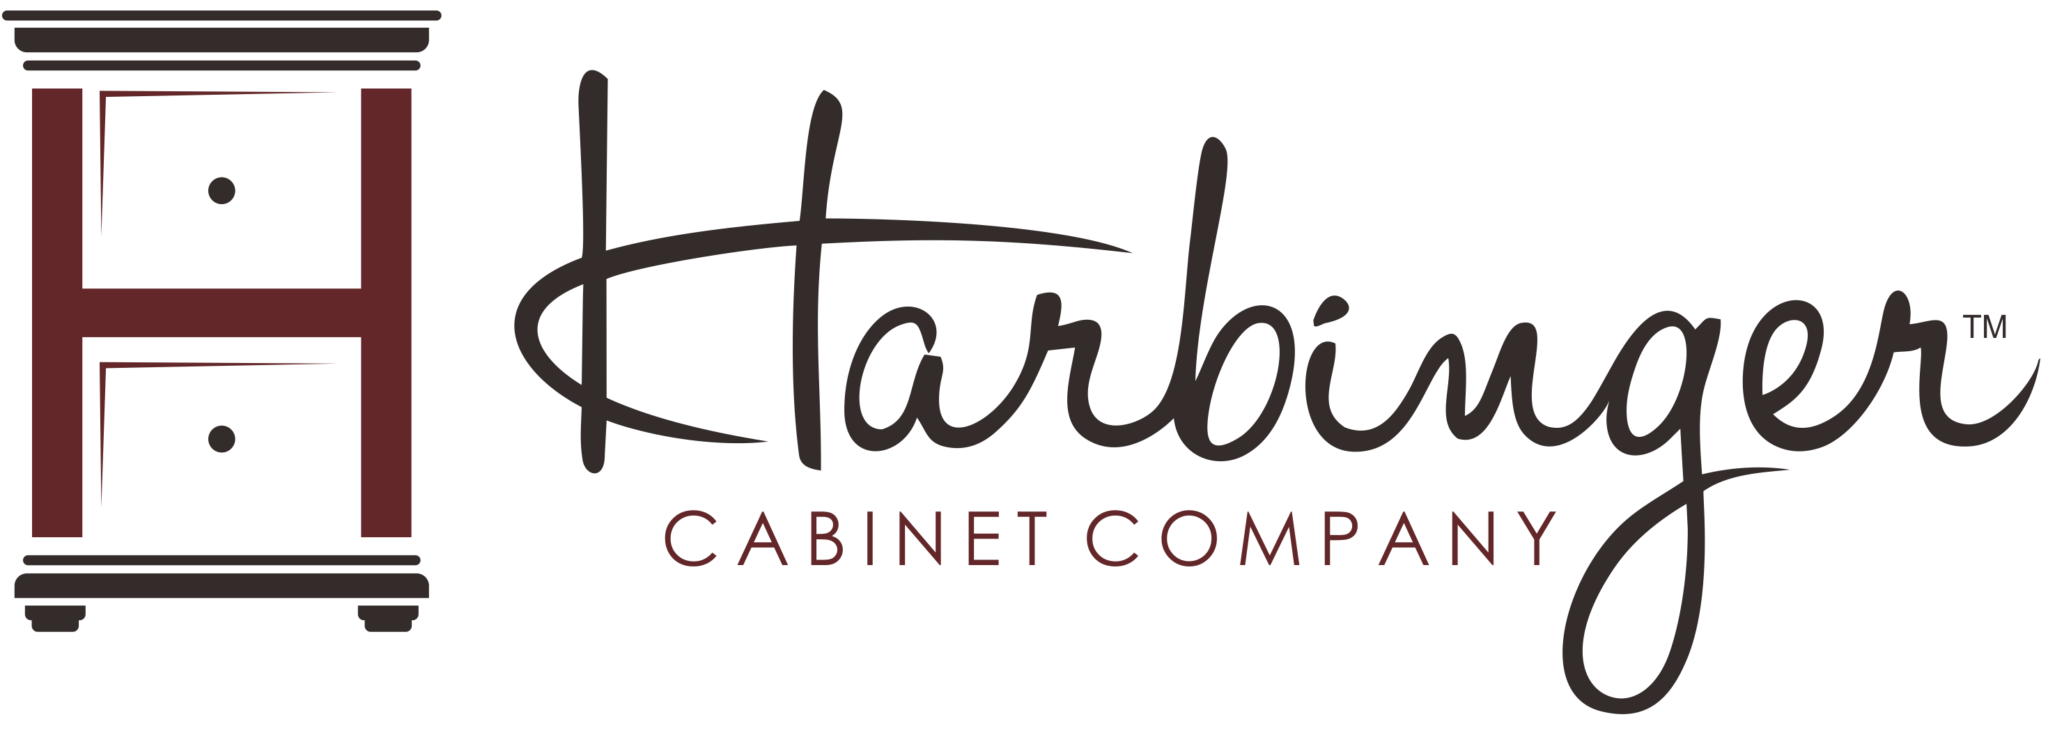 Cabinet Logo - Harbinger Cabinet Company | Wood Cabinetry Done Right